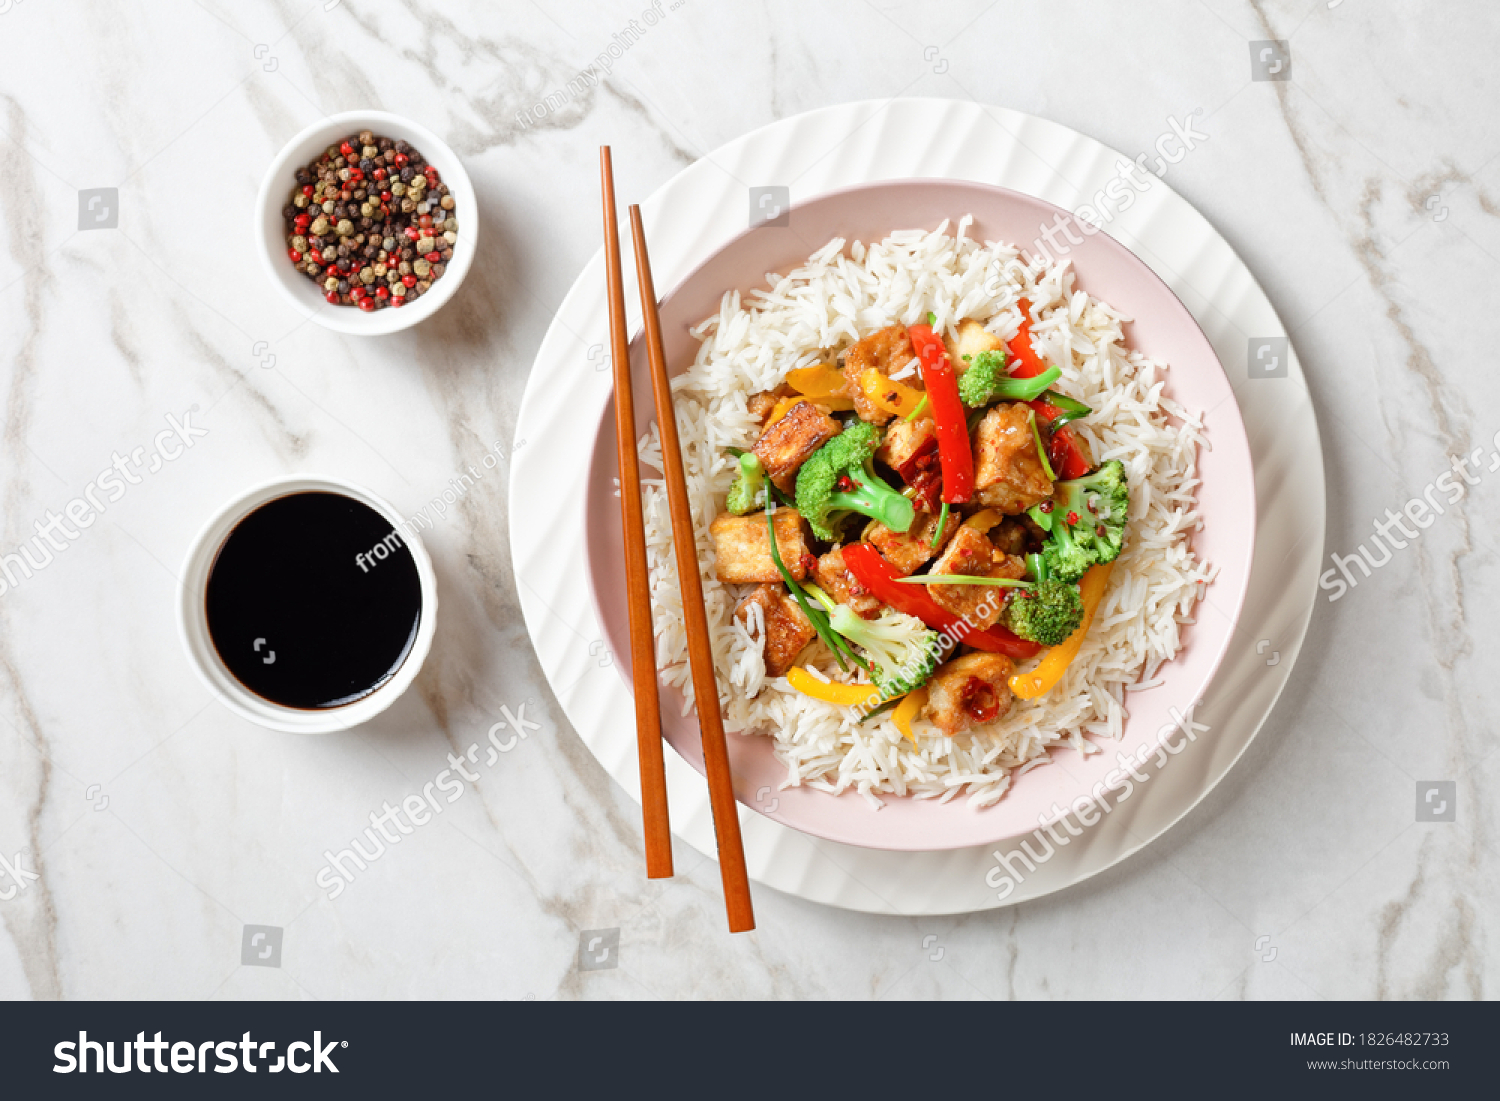 Japanese dish katsu chicken curry with vegetables: broccoli, red and yellow sweet pepper and parsley over jasmine rice served on a pink plate on a stone background served with chopsticks, close-up #1826482733